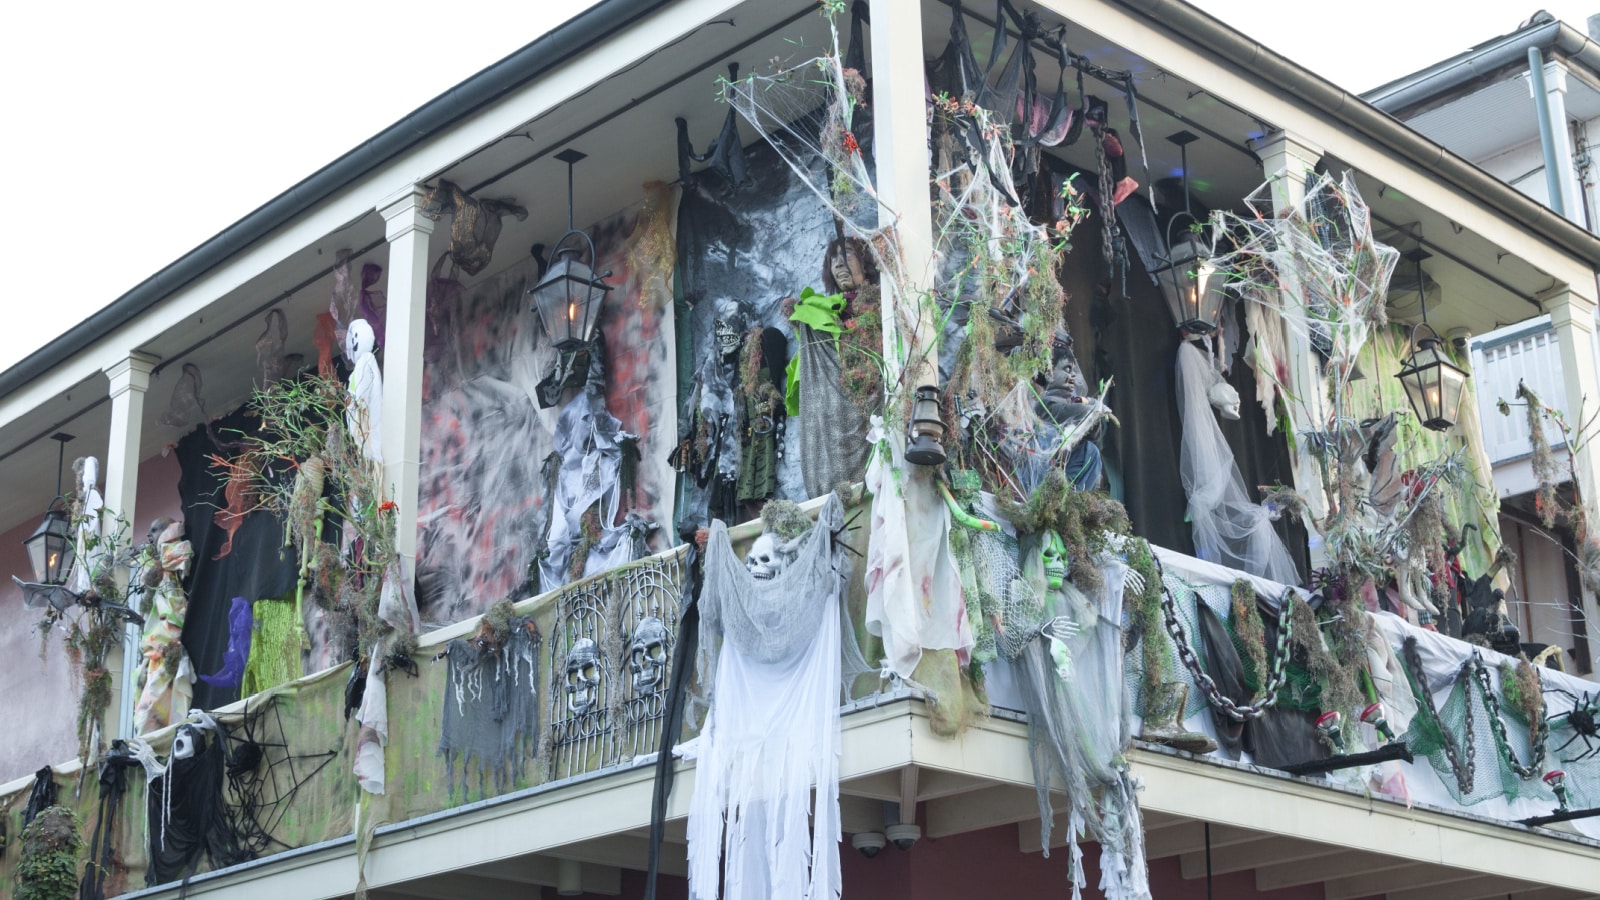 NEW ORLEANS, USA - OCTOBER 10, 2014: The upper balcony of a house on Bourbon Street is heavily decorated for Halloween with ghouls, ghosts and skulls.